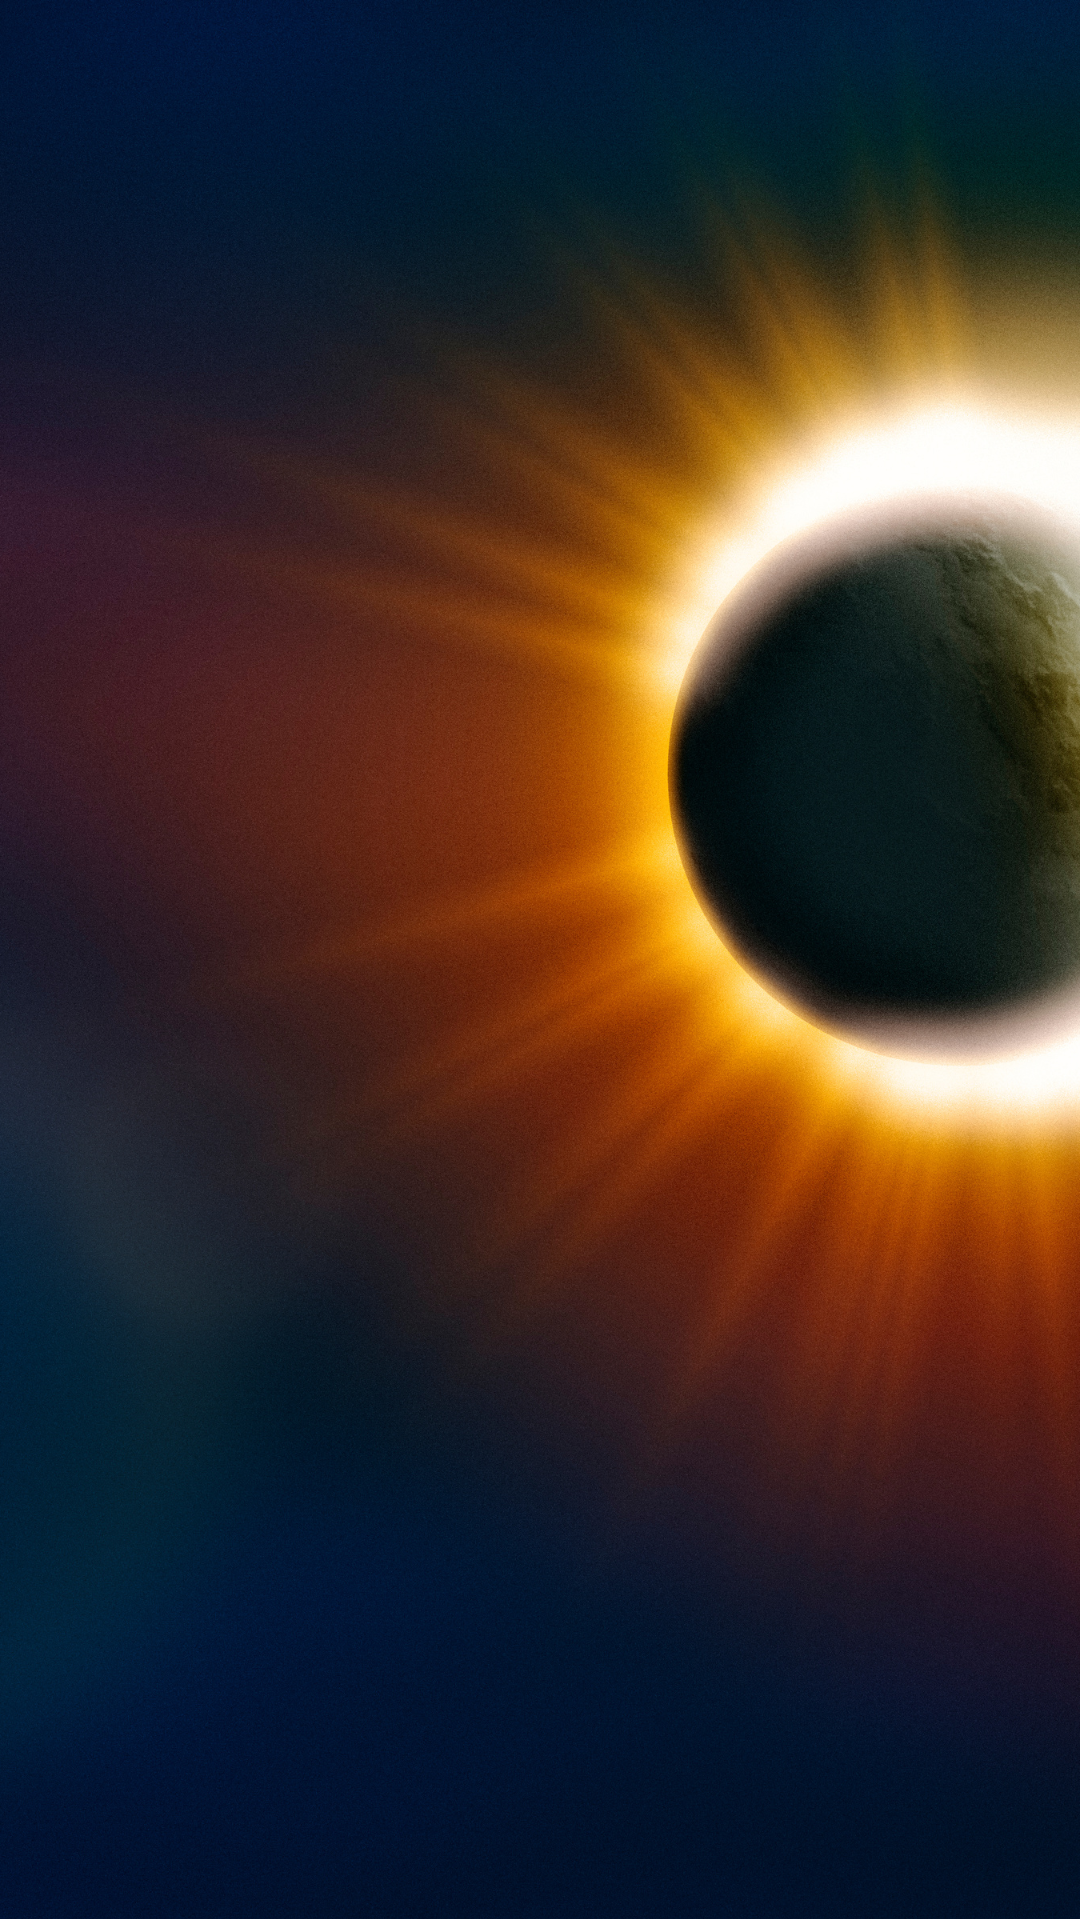 Solar Eclipse Photo Image Pictures Stunning Photos Of Hybrid